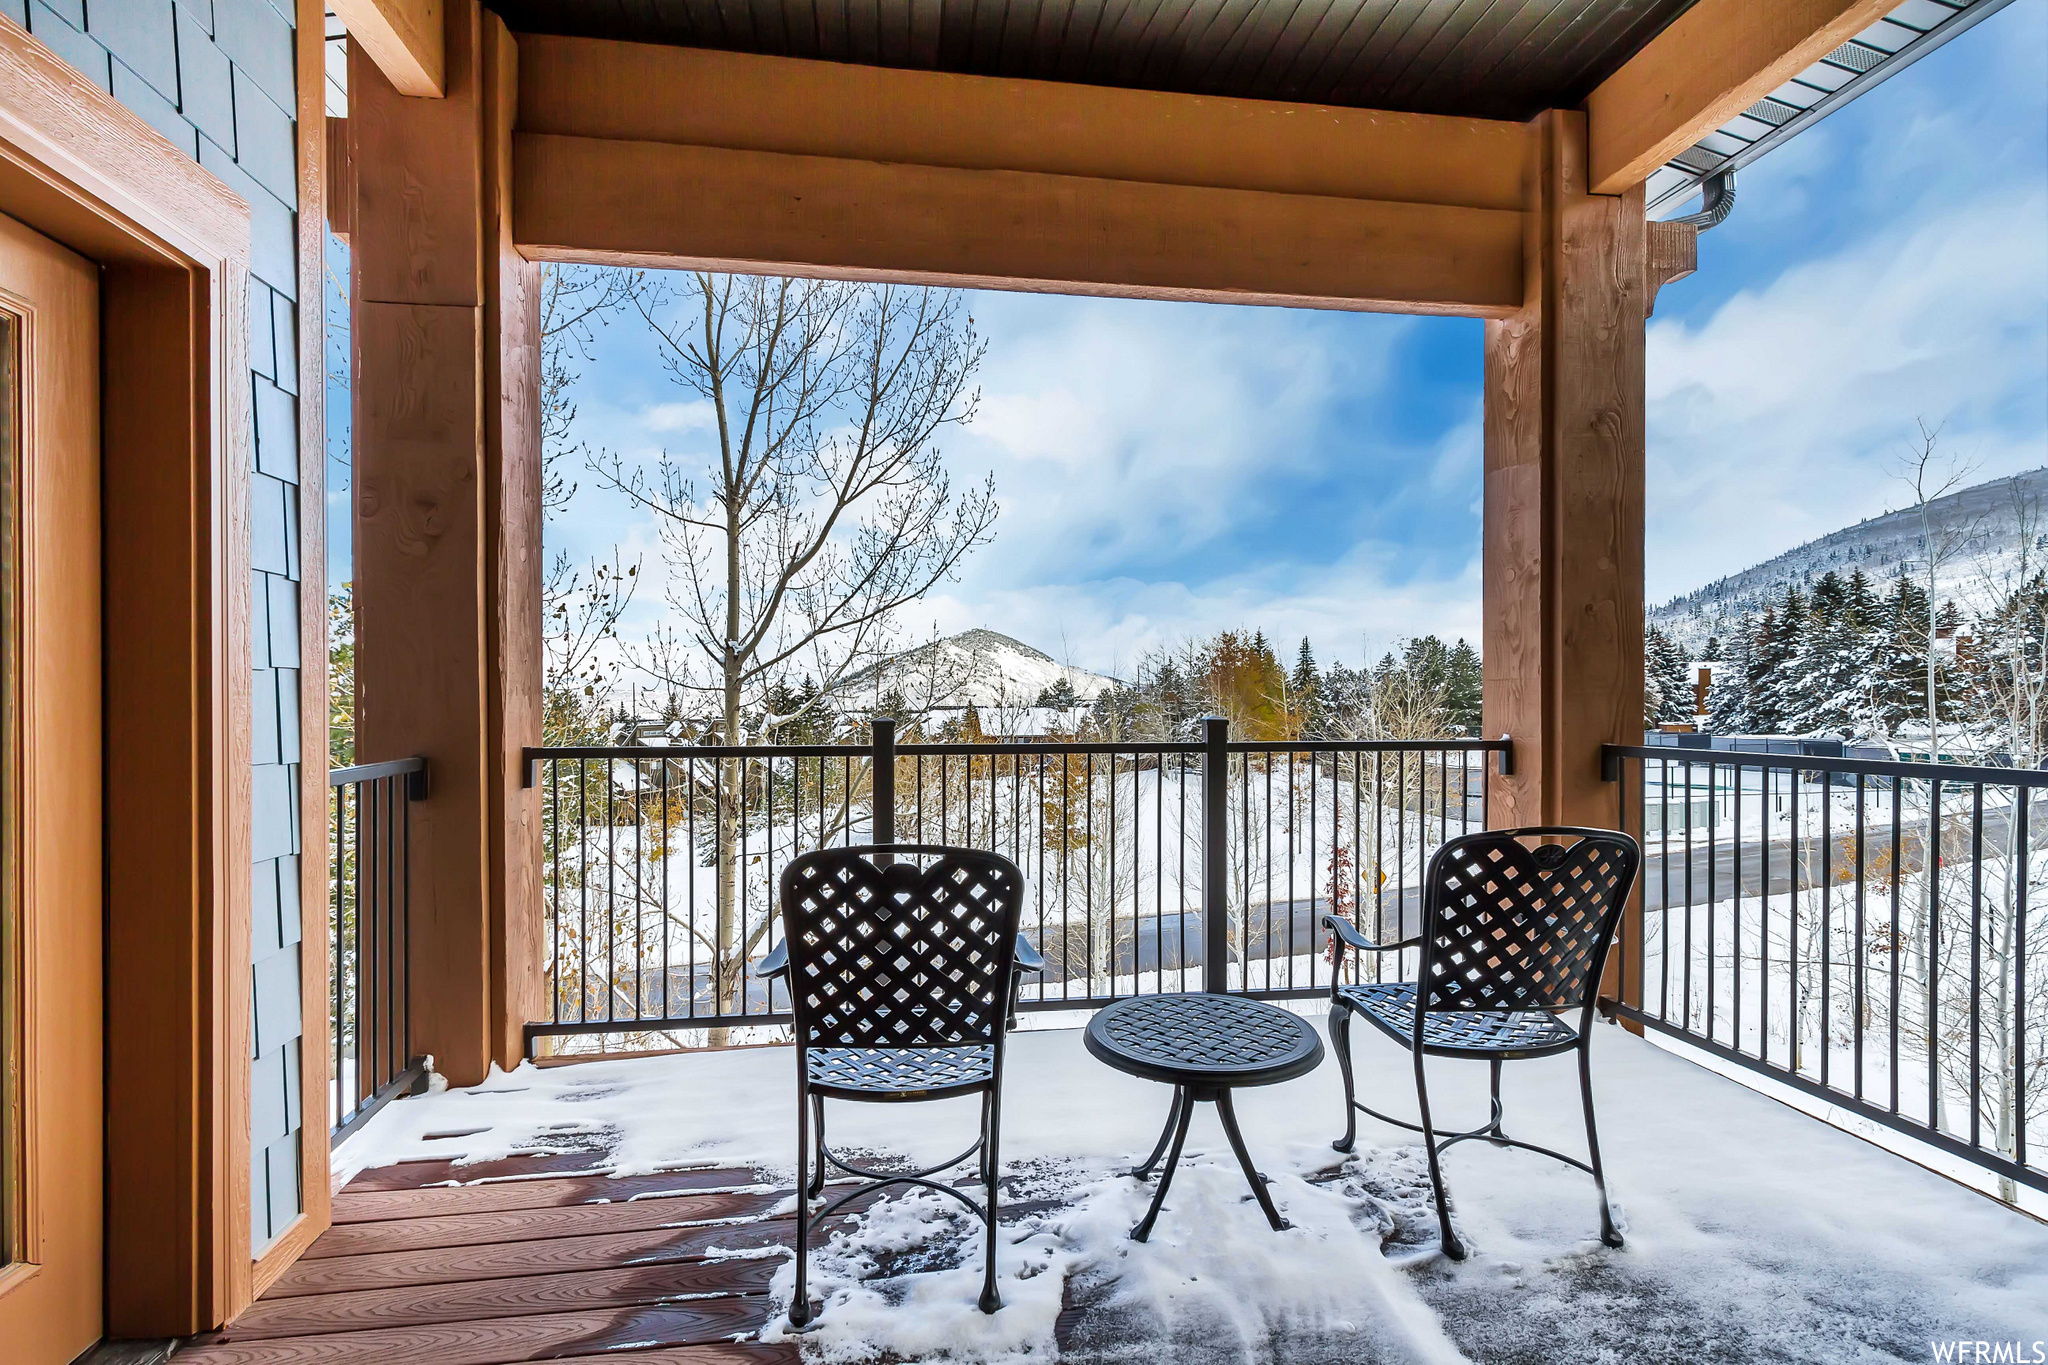 2653 CANYON RESORT #220, Park City, Utah 84098, 2 Bedrooms Bedrooms, 10 Rooms Rooms,2 BathroomsBathrooms,Residential,For sale,CANYON RESORT,1851484